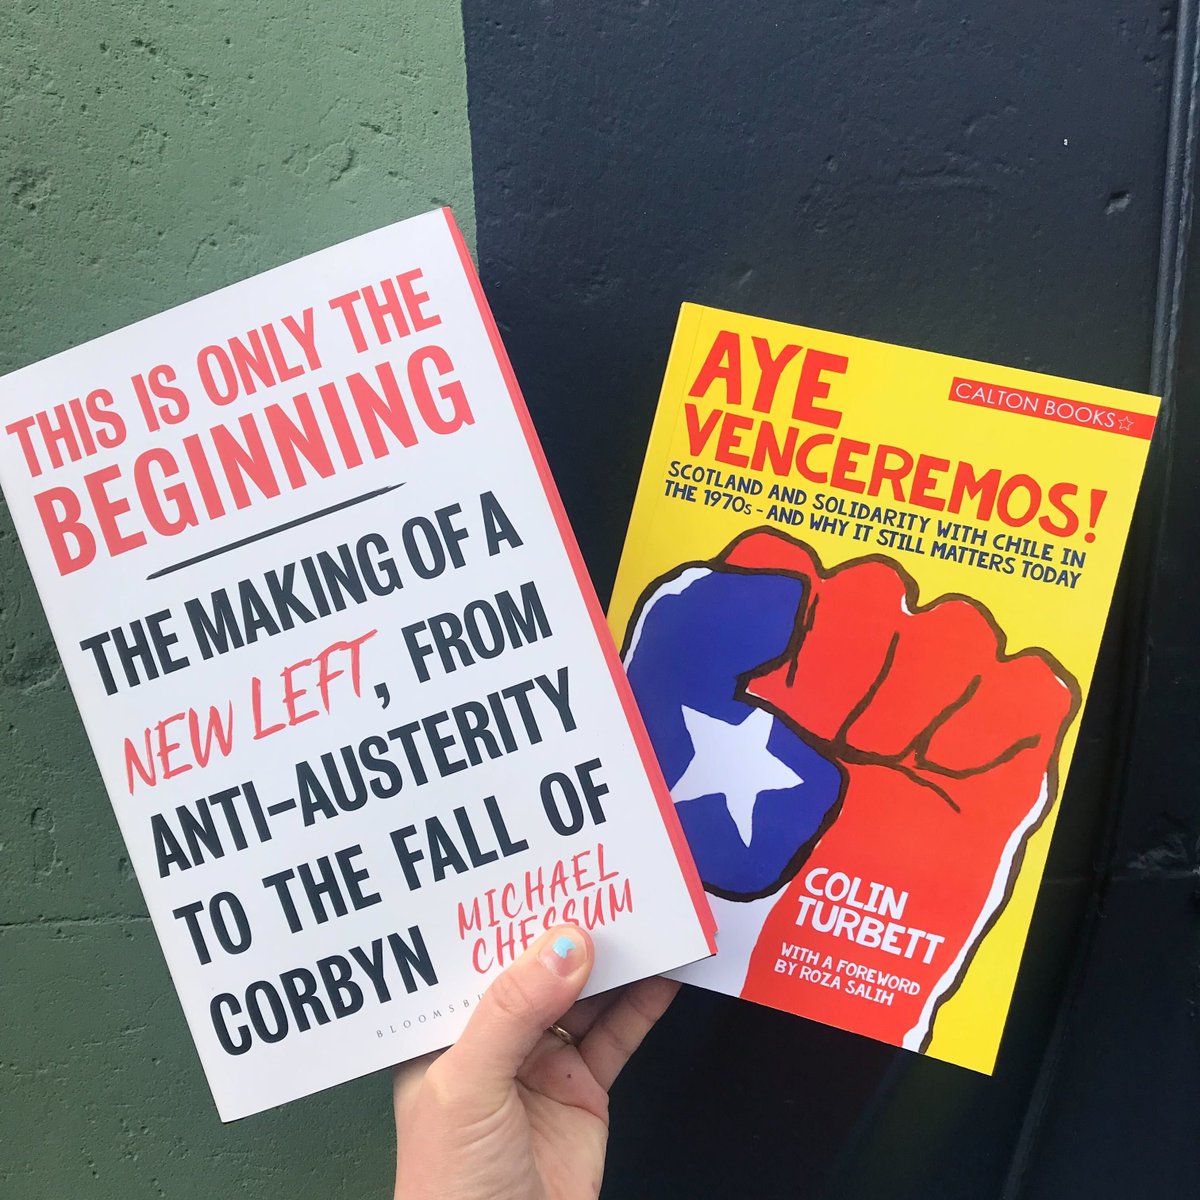 Thanks for a SPLENDID #BookFringe weekend! This week includes 2 marvelous events on the history of solidarity & coalition. On Aug 16 Colin Turbett explores Scottish-Chilean solidarity & on Aug 20 Michael Chessum talks about what's happened to the left! shorturl.ac/7bc8e